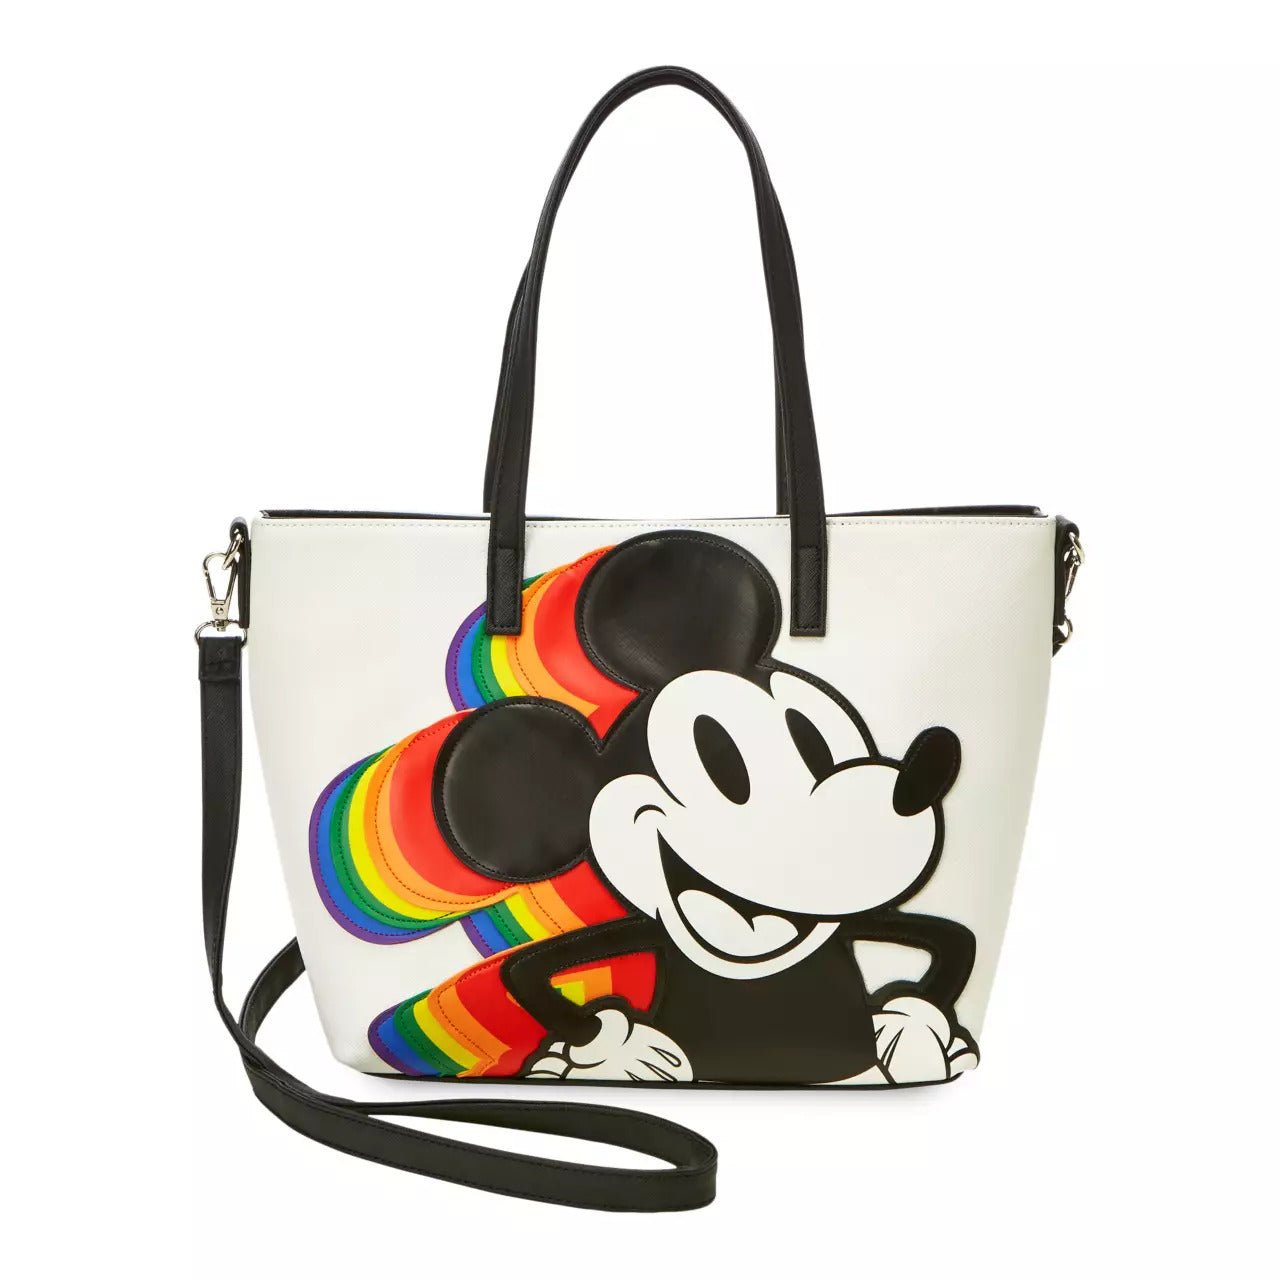 Disney Mickey Mouse Rainbow Tote - Loungefly - 1